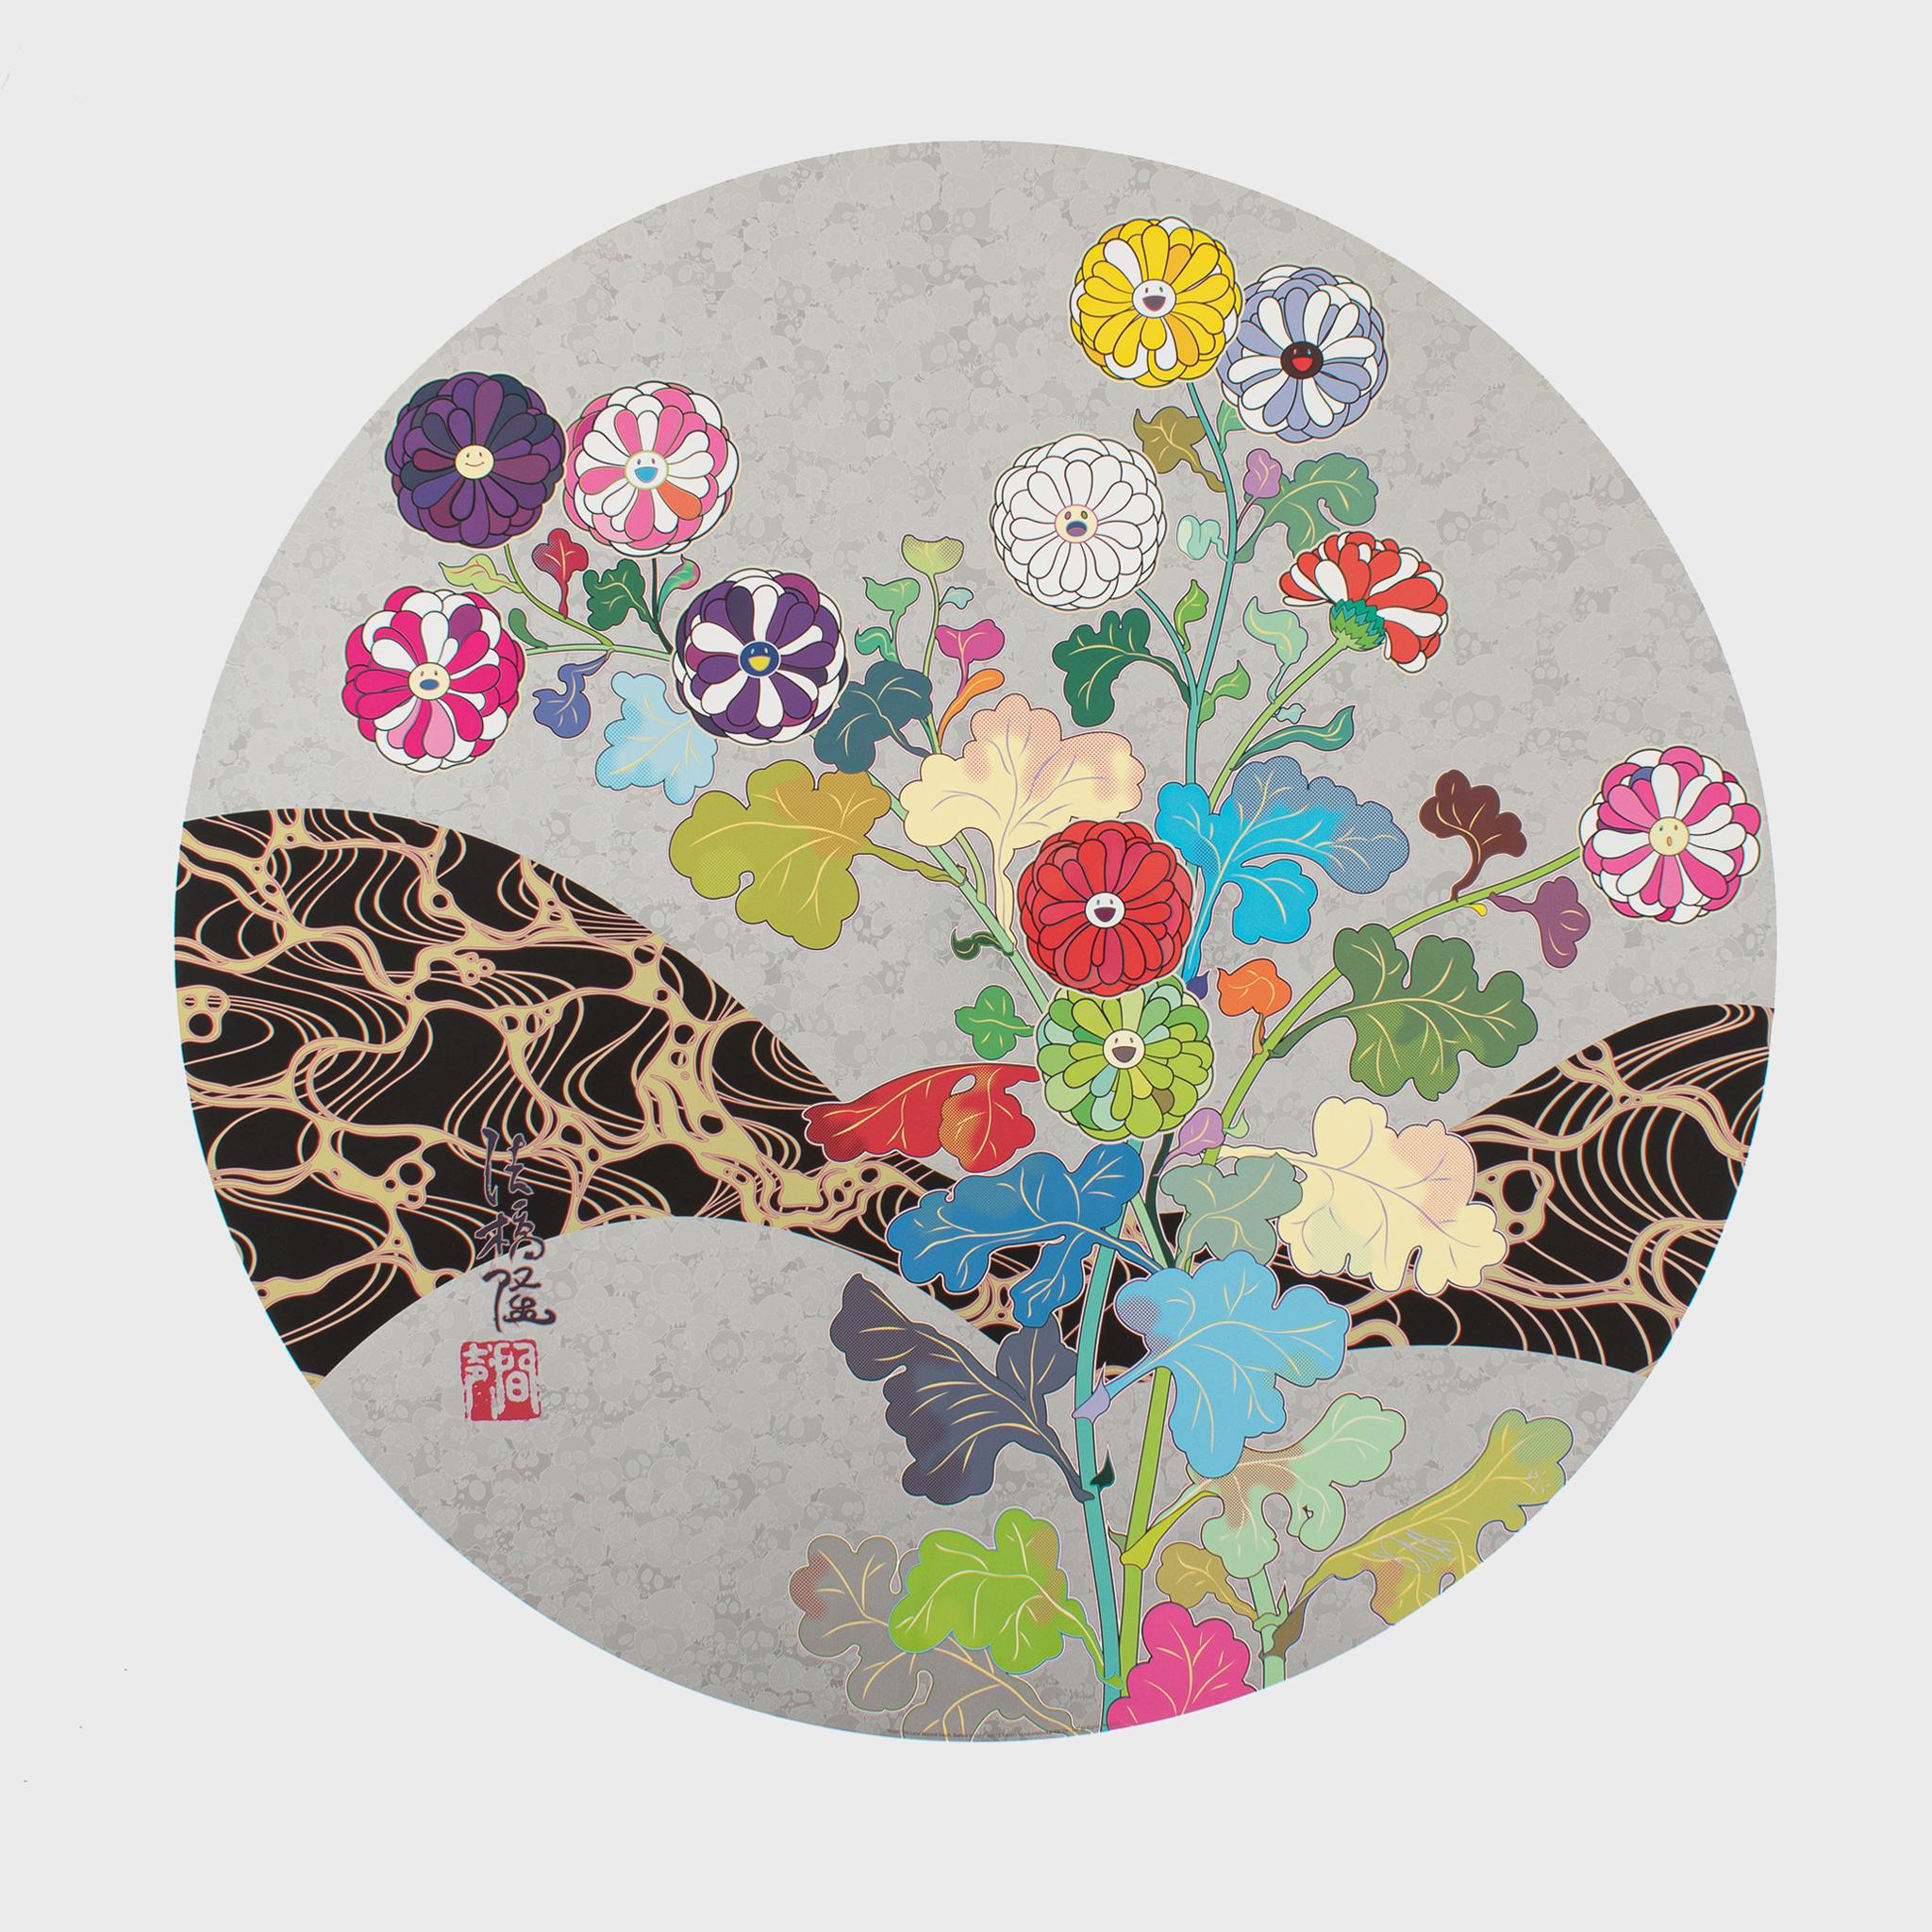 Takashi Murakami Abstract Print - Kōrin: The Land Beyond Death, Bathed in Light